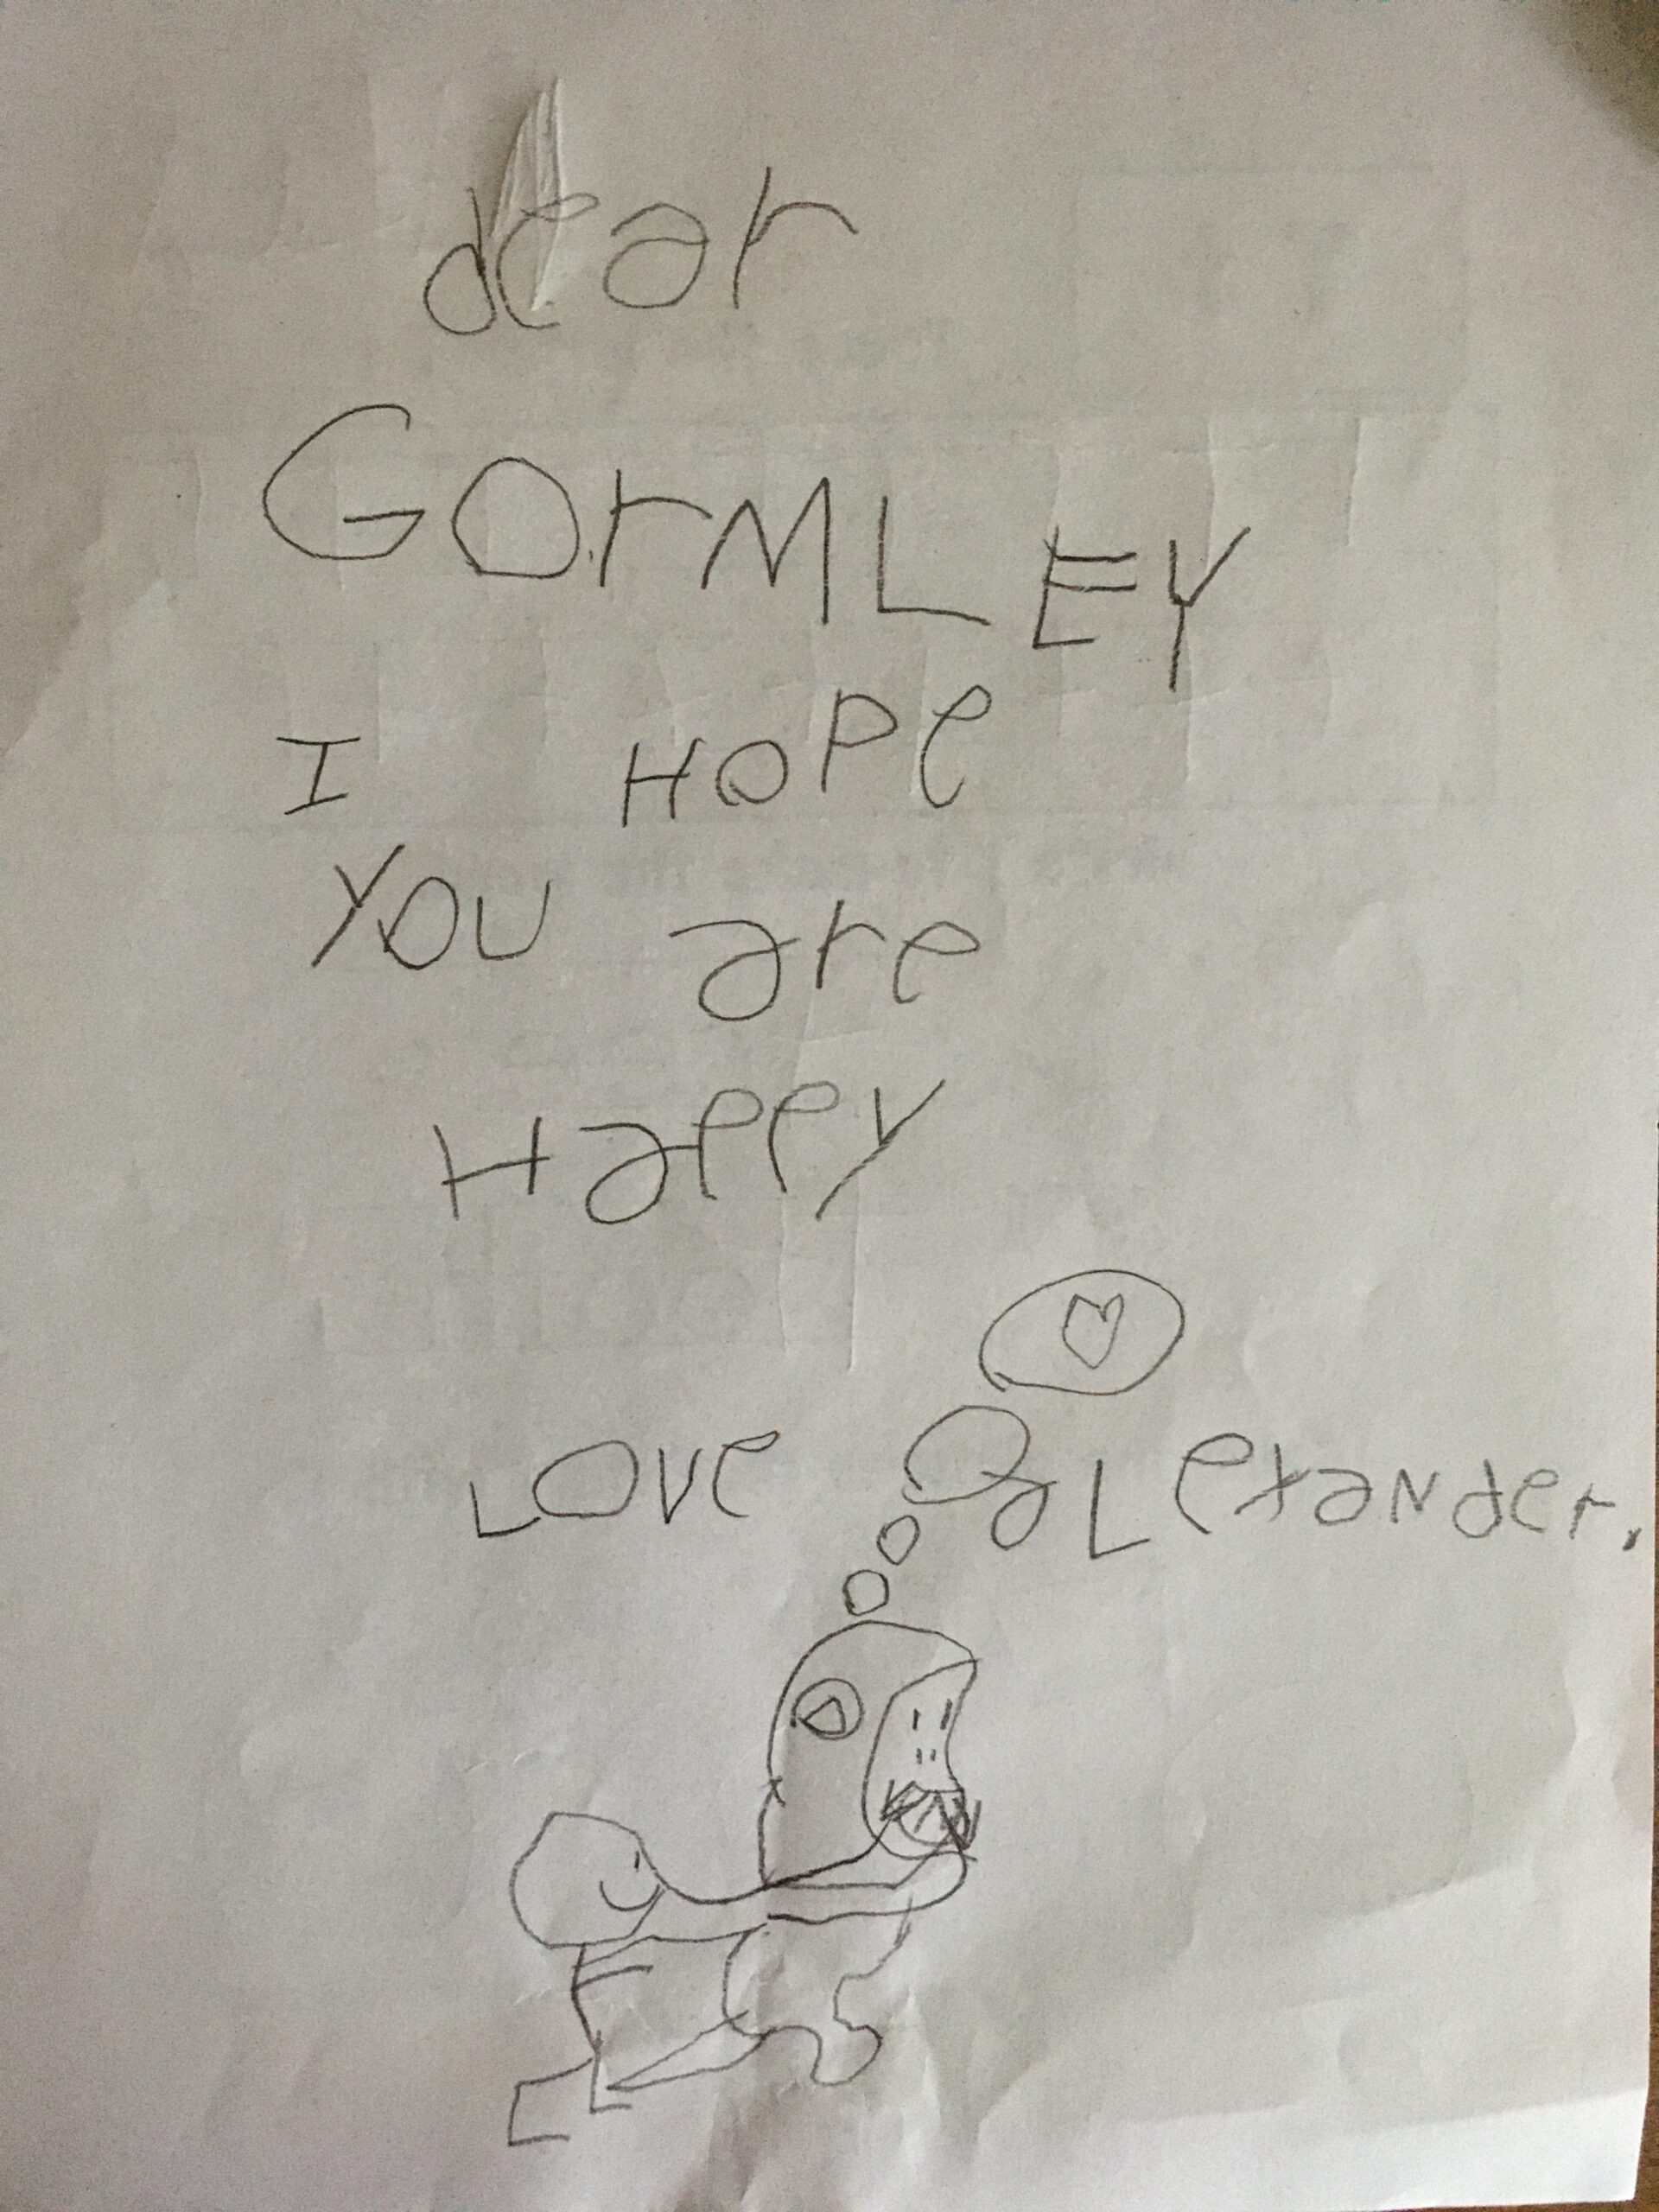 Letter from Alexander to Gormley